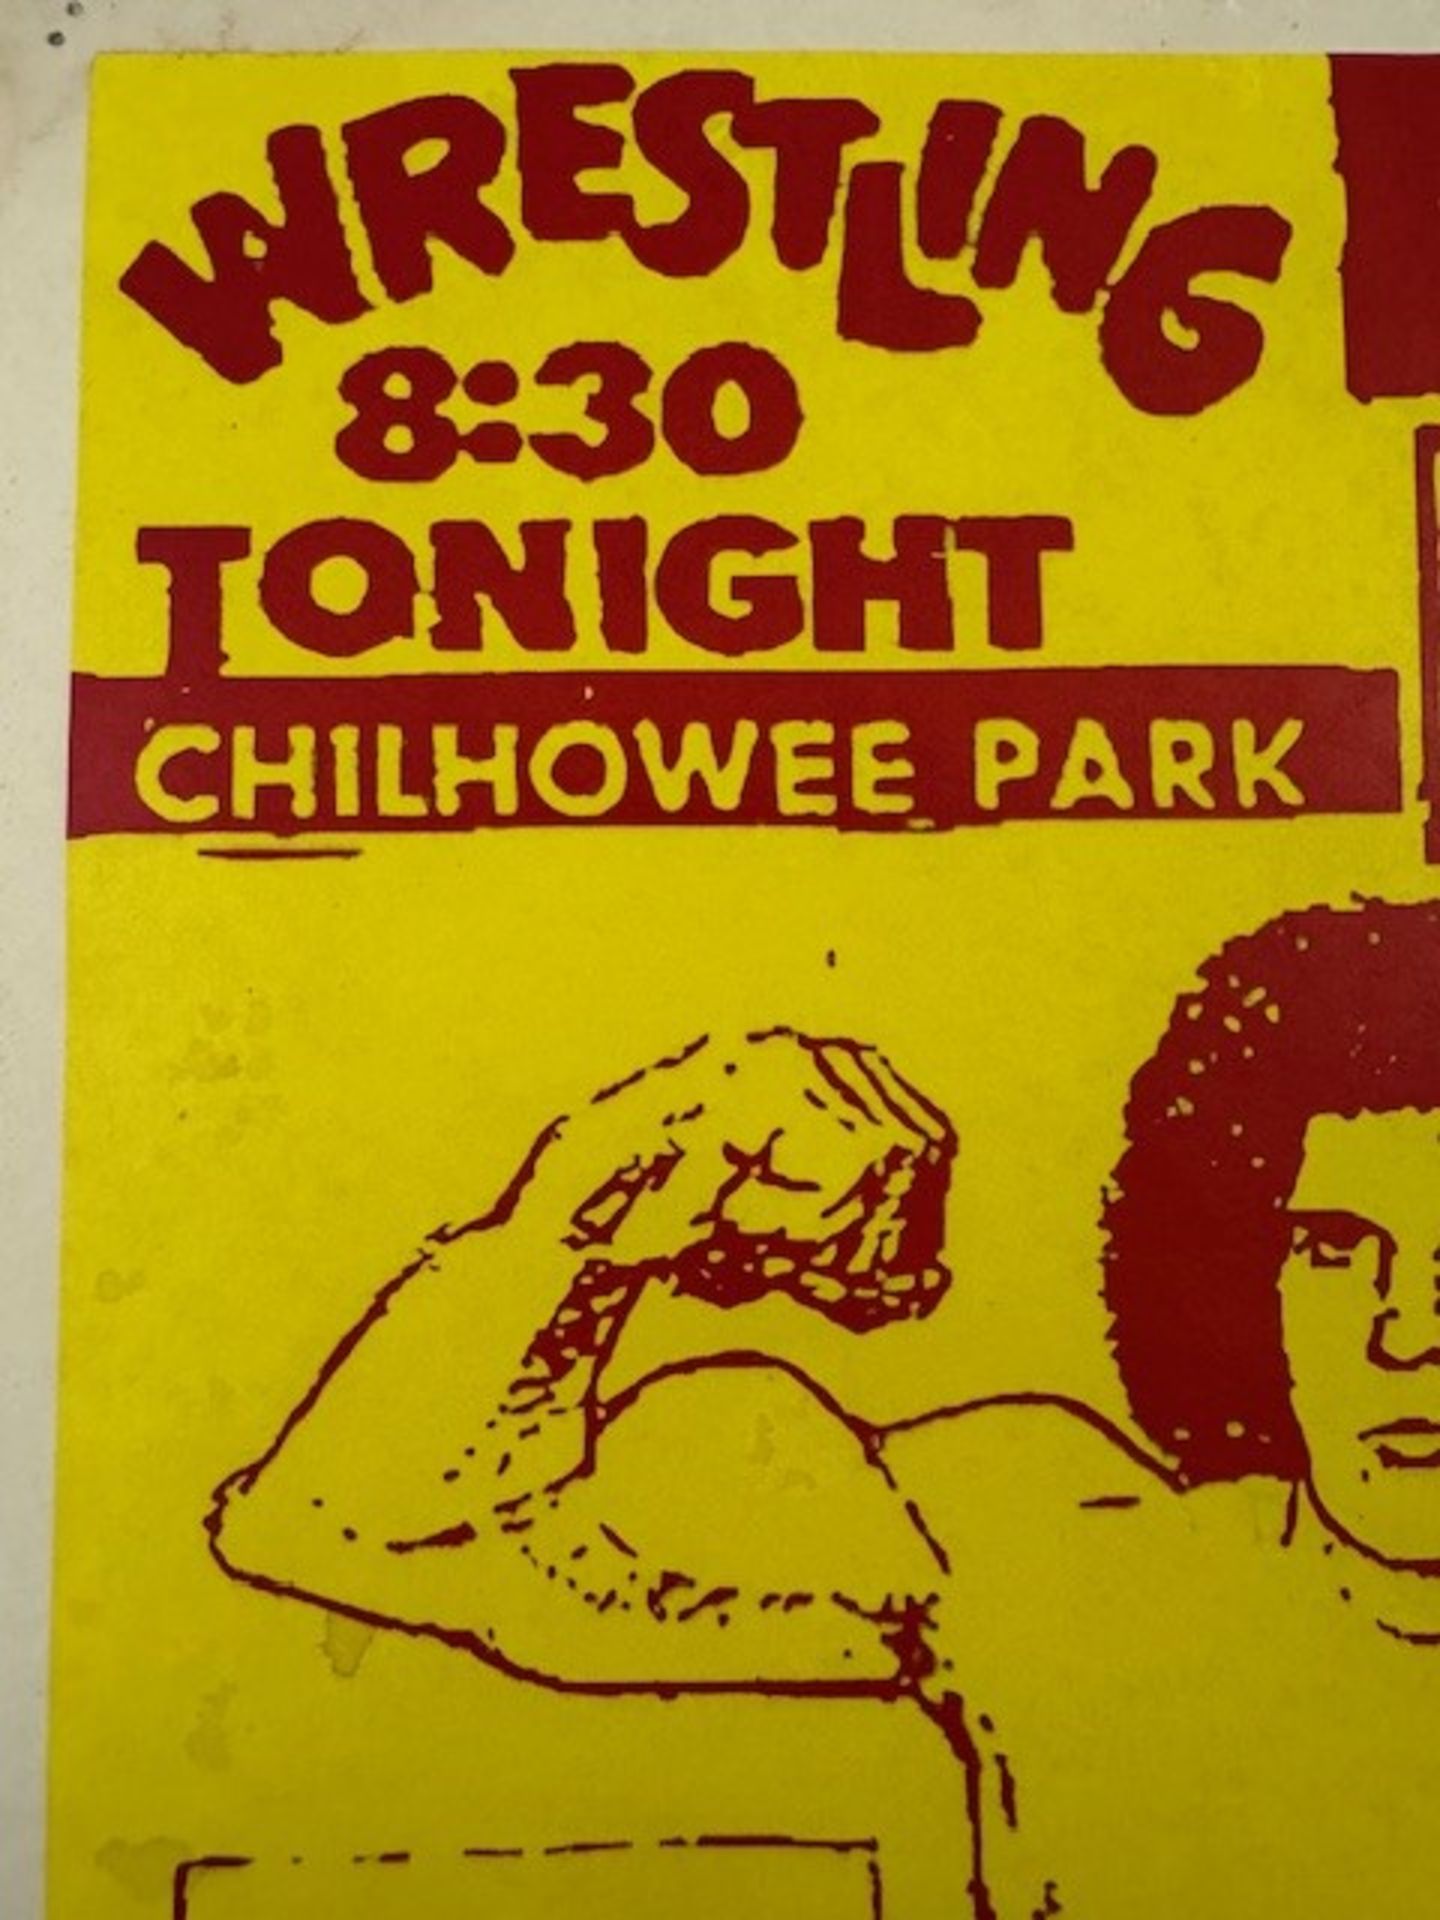 Andre the giant poster - Bild 3 aus 6